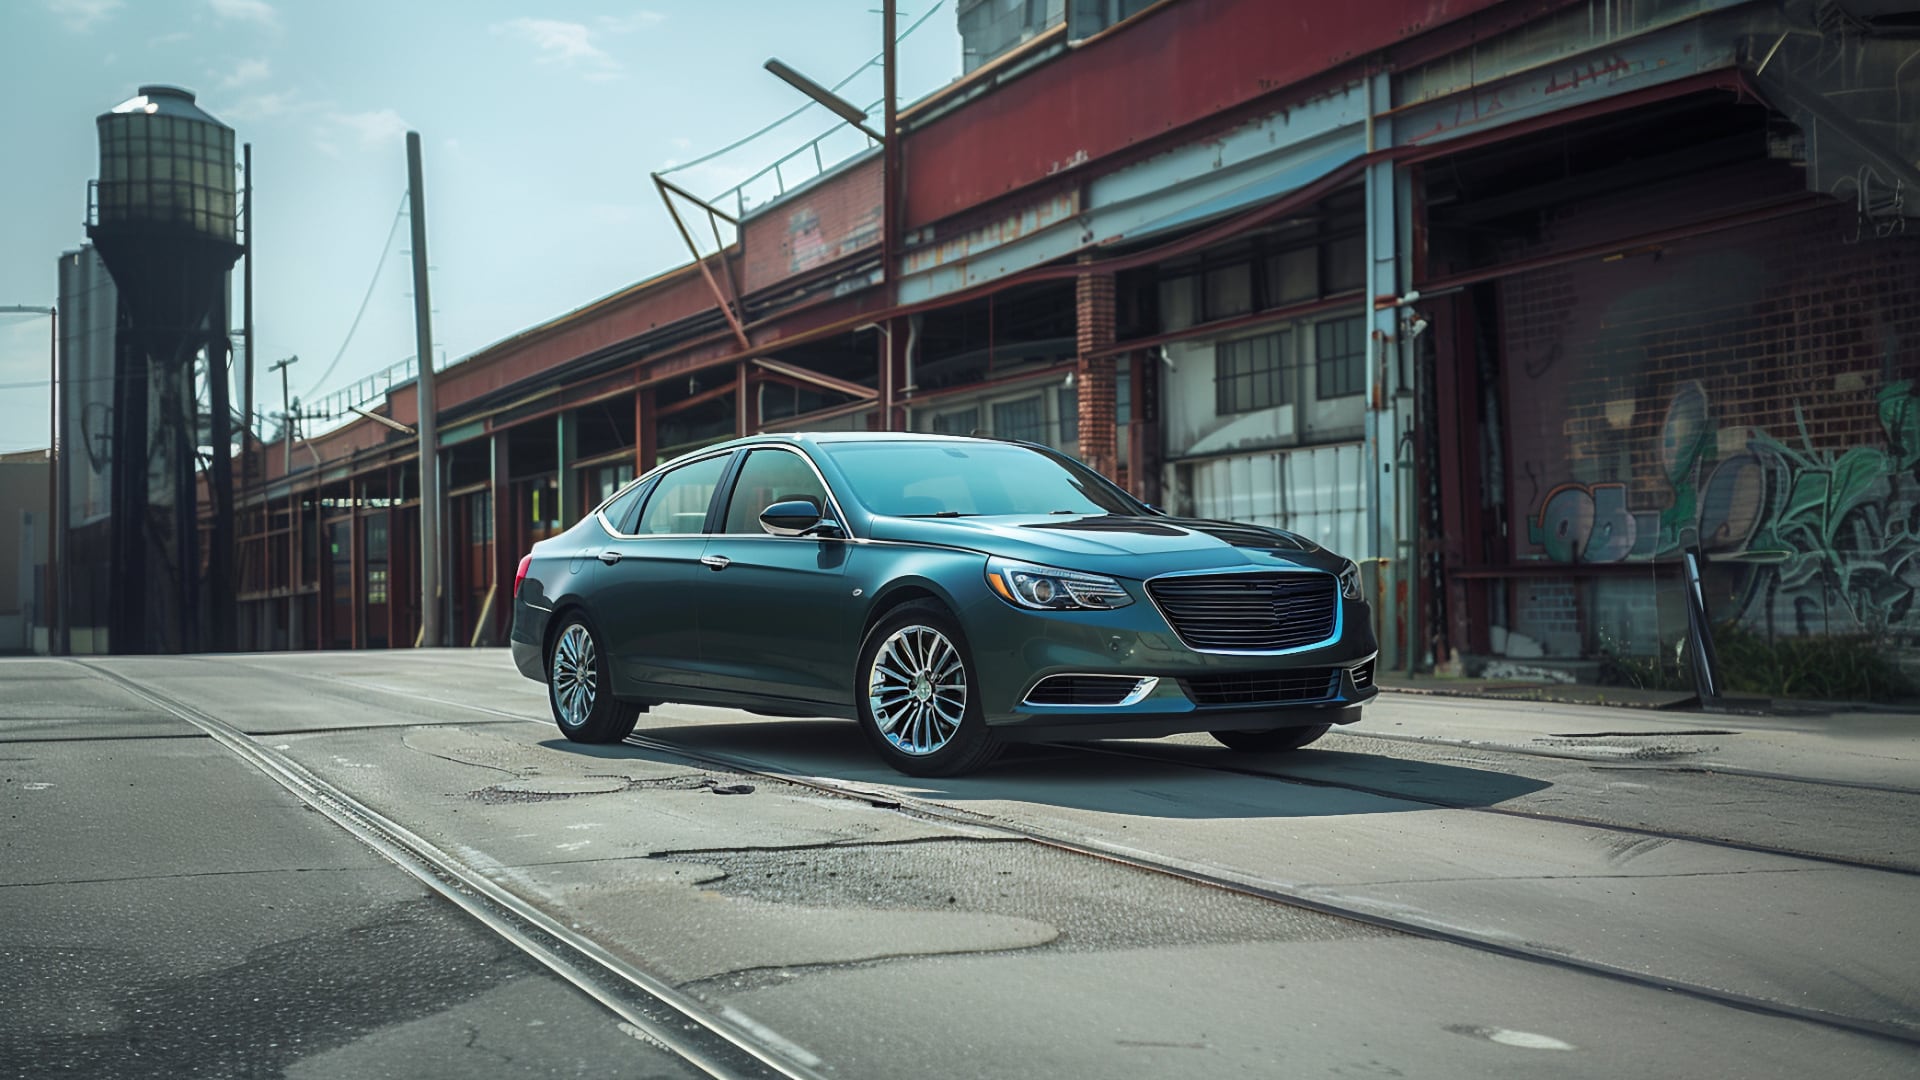 The 2018 Buick Regal is parked in front of an industrial building.